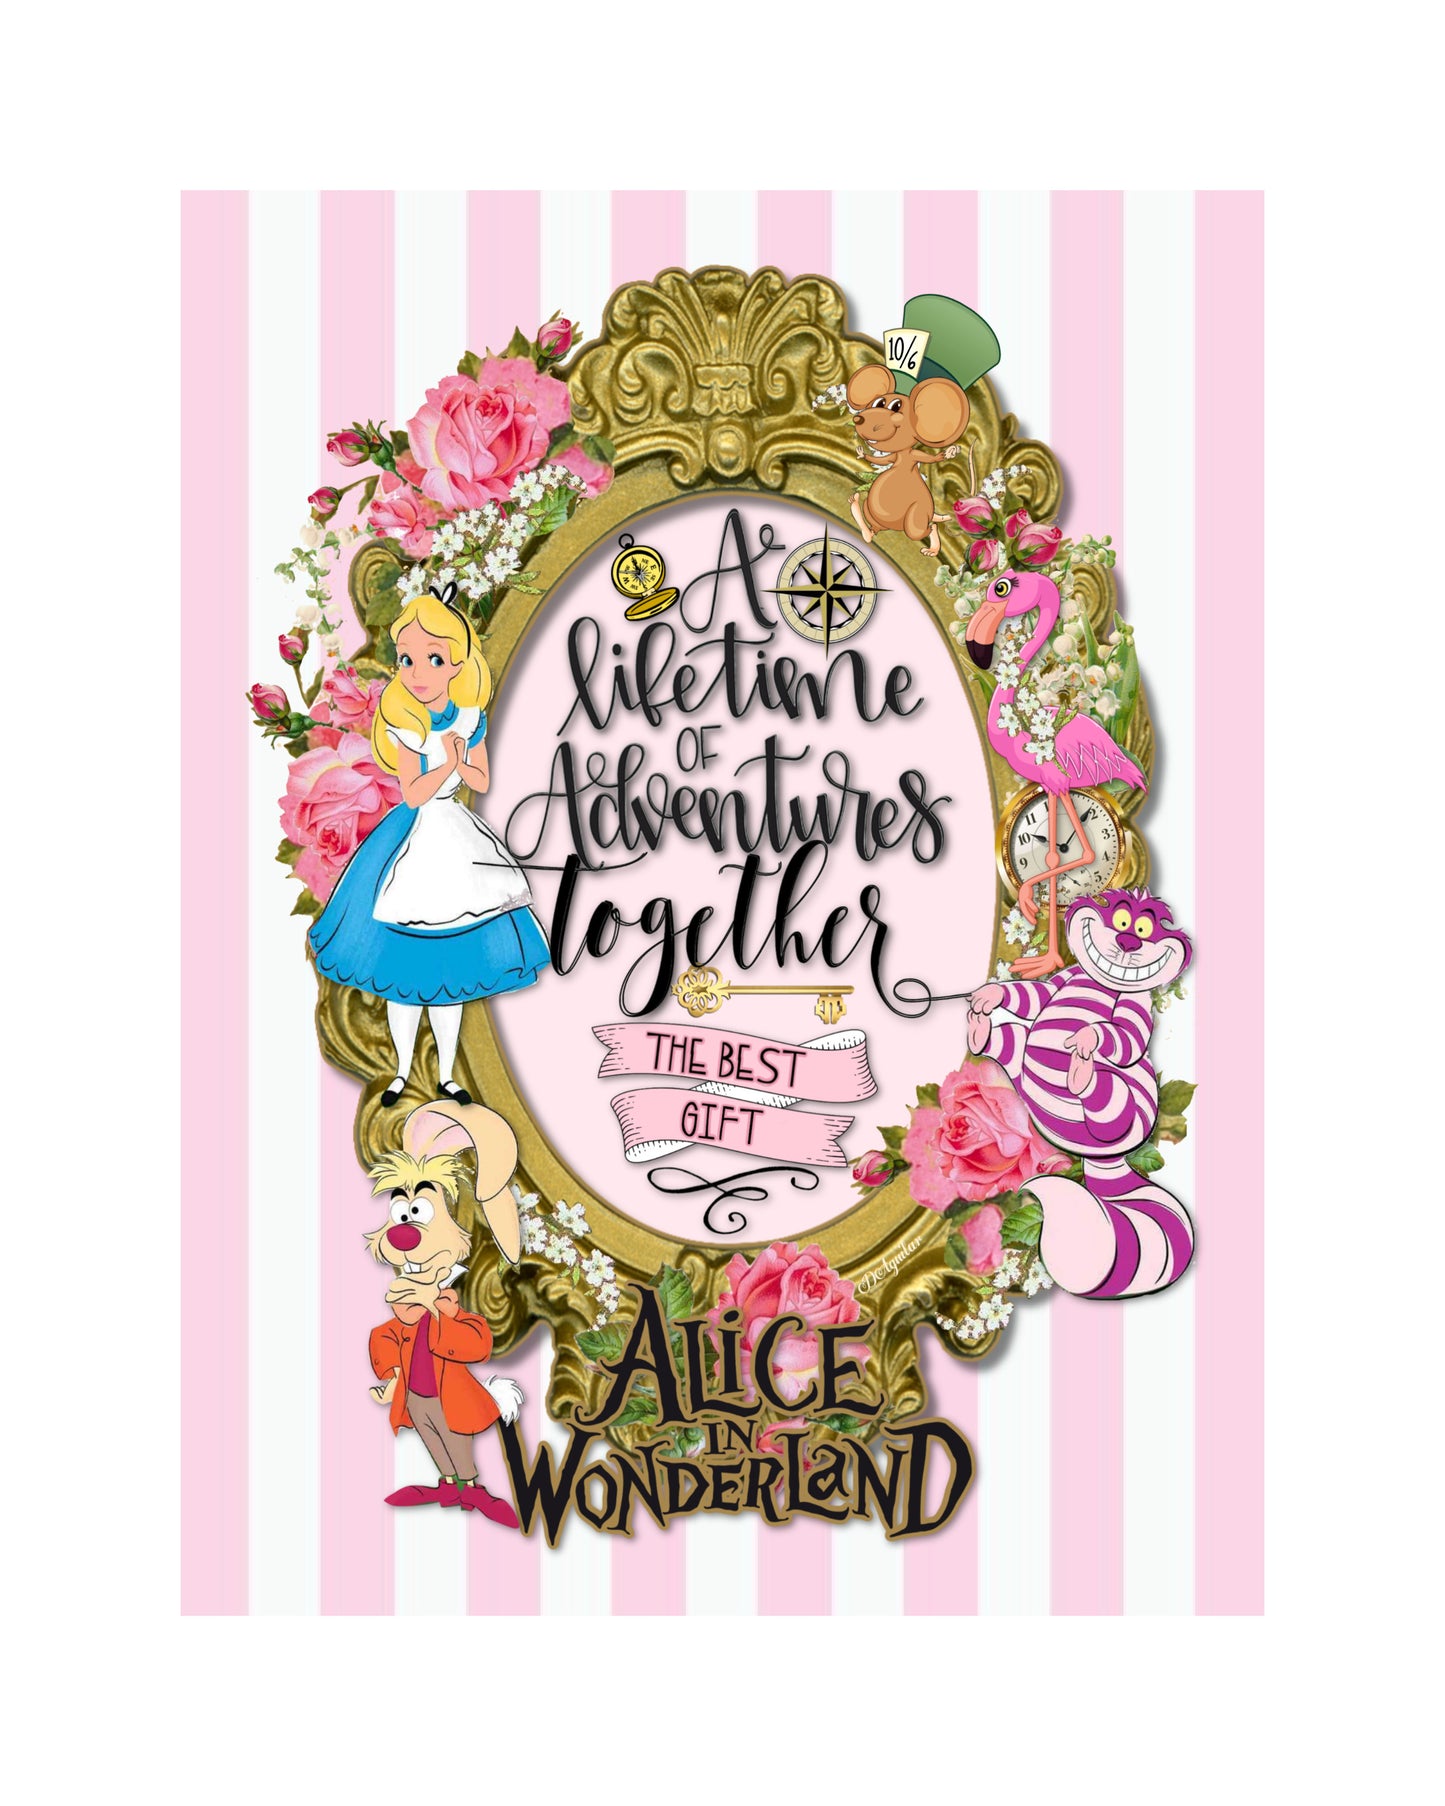 " A Lifetime of Adventures Together" 8x11 Alice in Wonderland Print Ready to frame  (set)